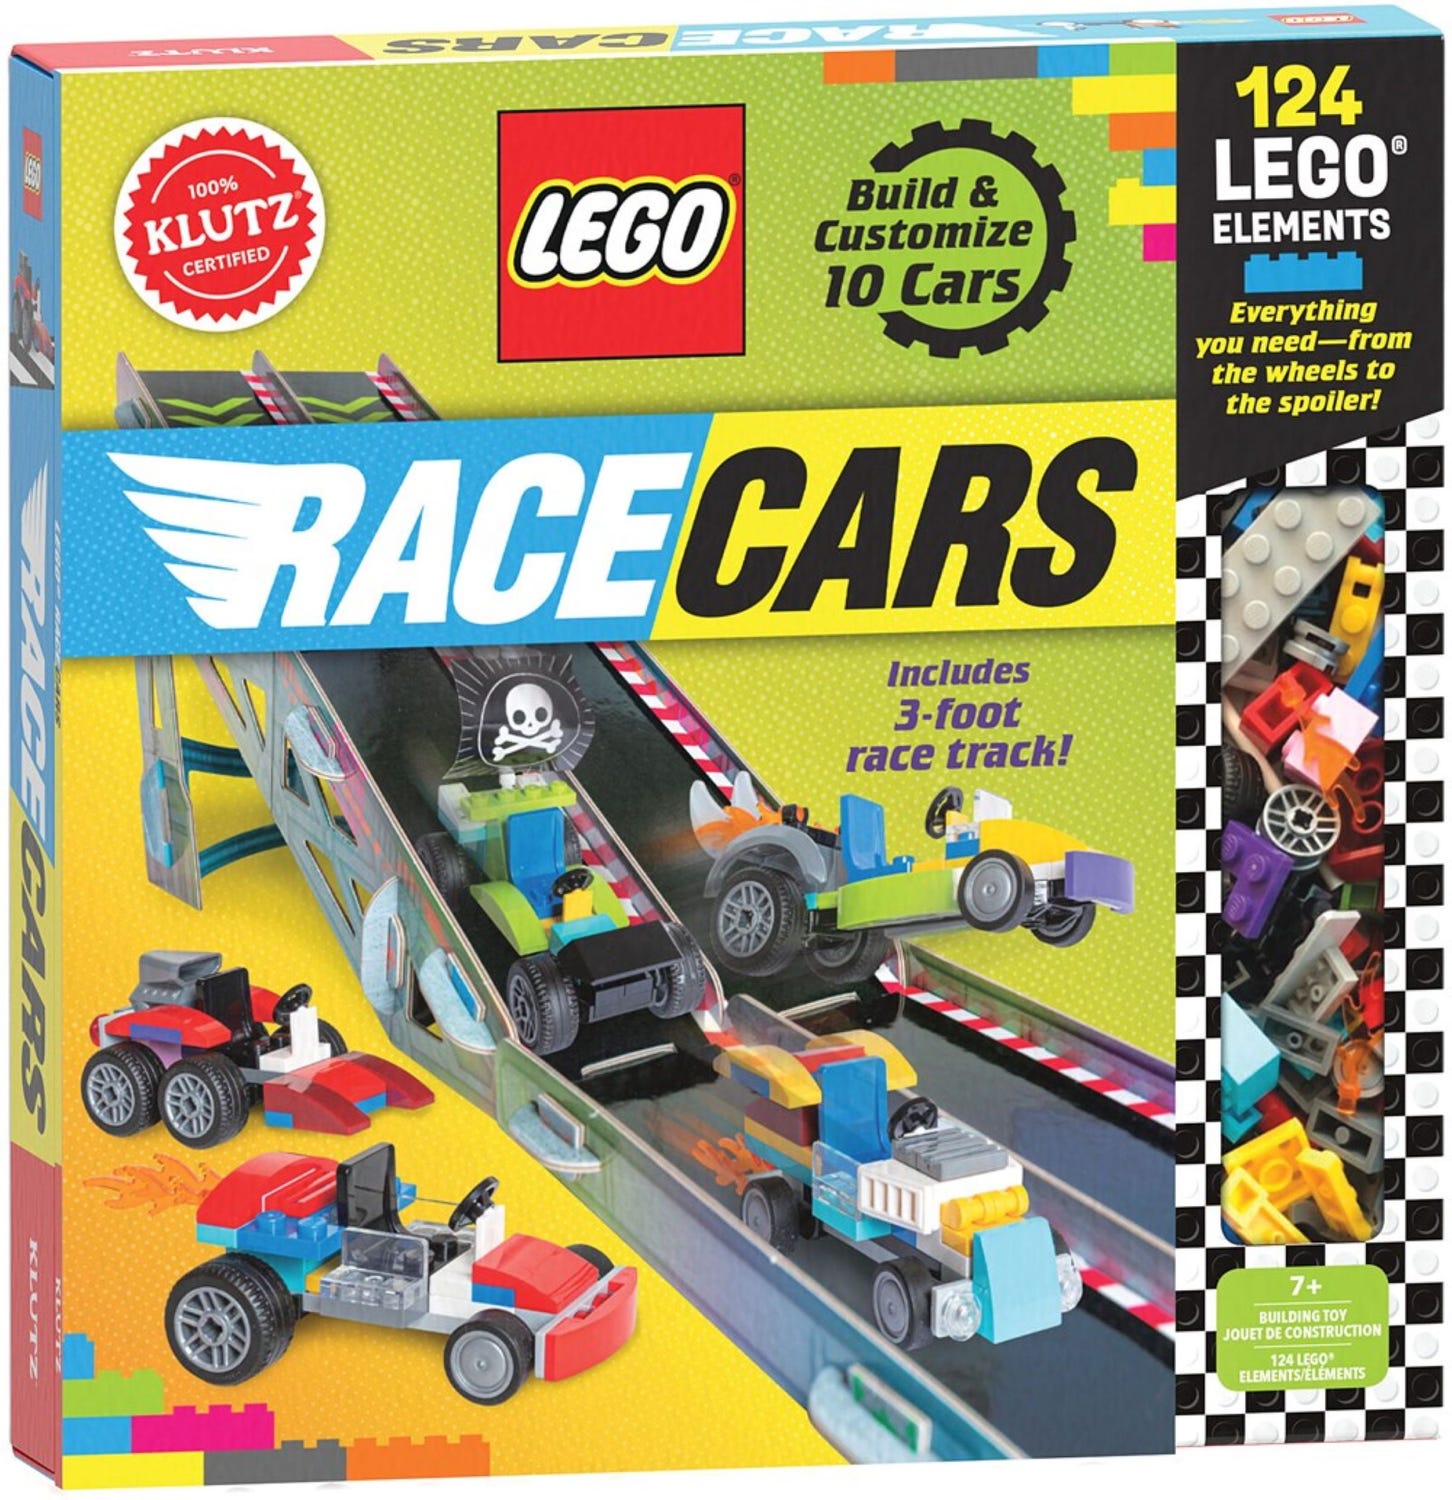 Race Cars 5007645, Other